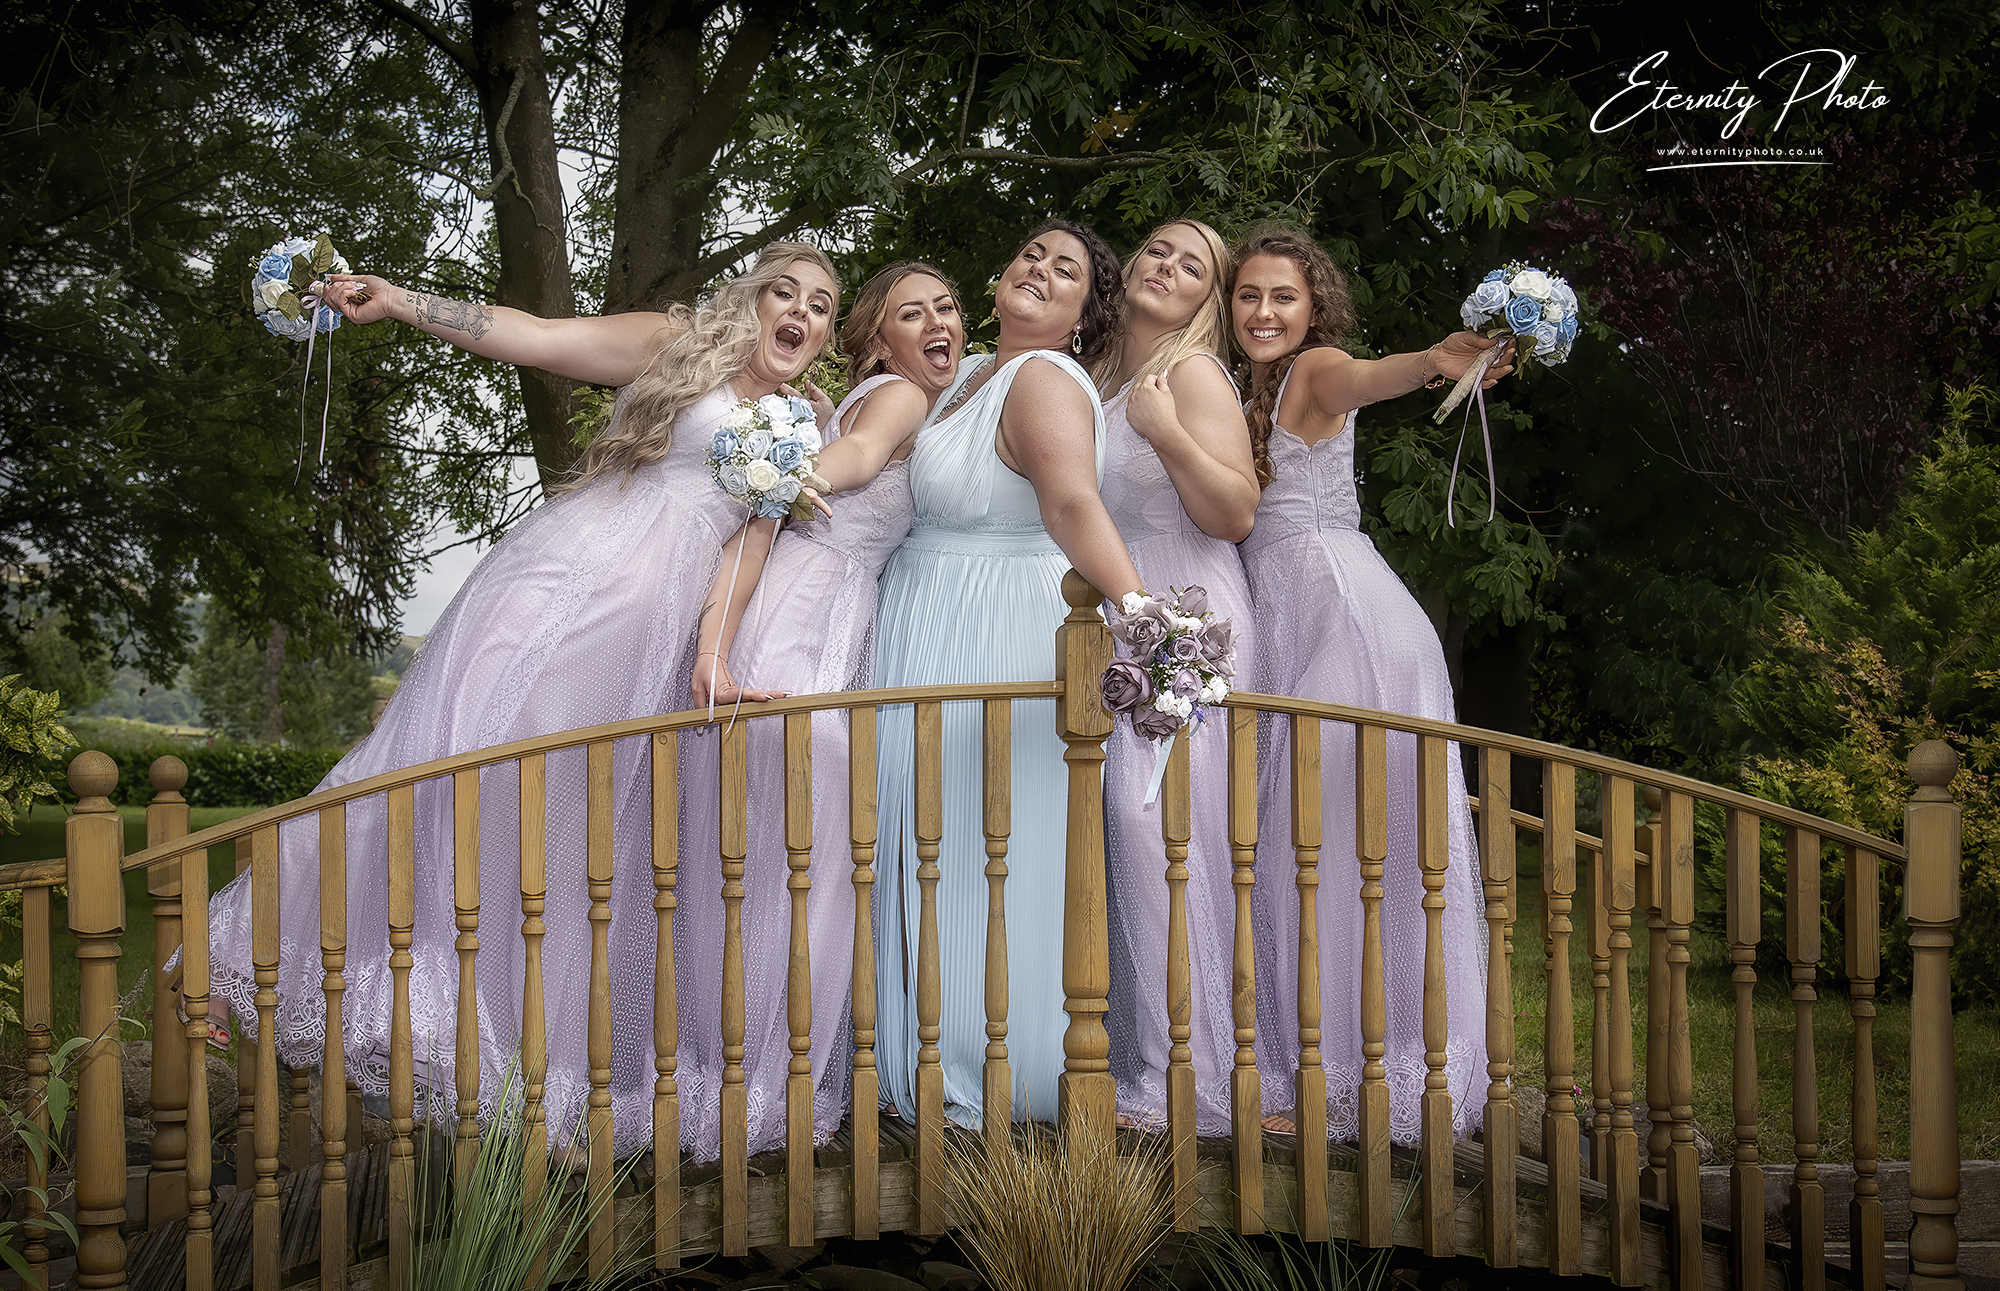 Bridesmaids smiling on bridge in lavender dresses with bouquets.